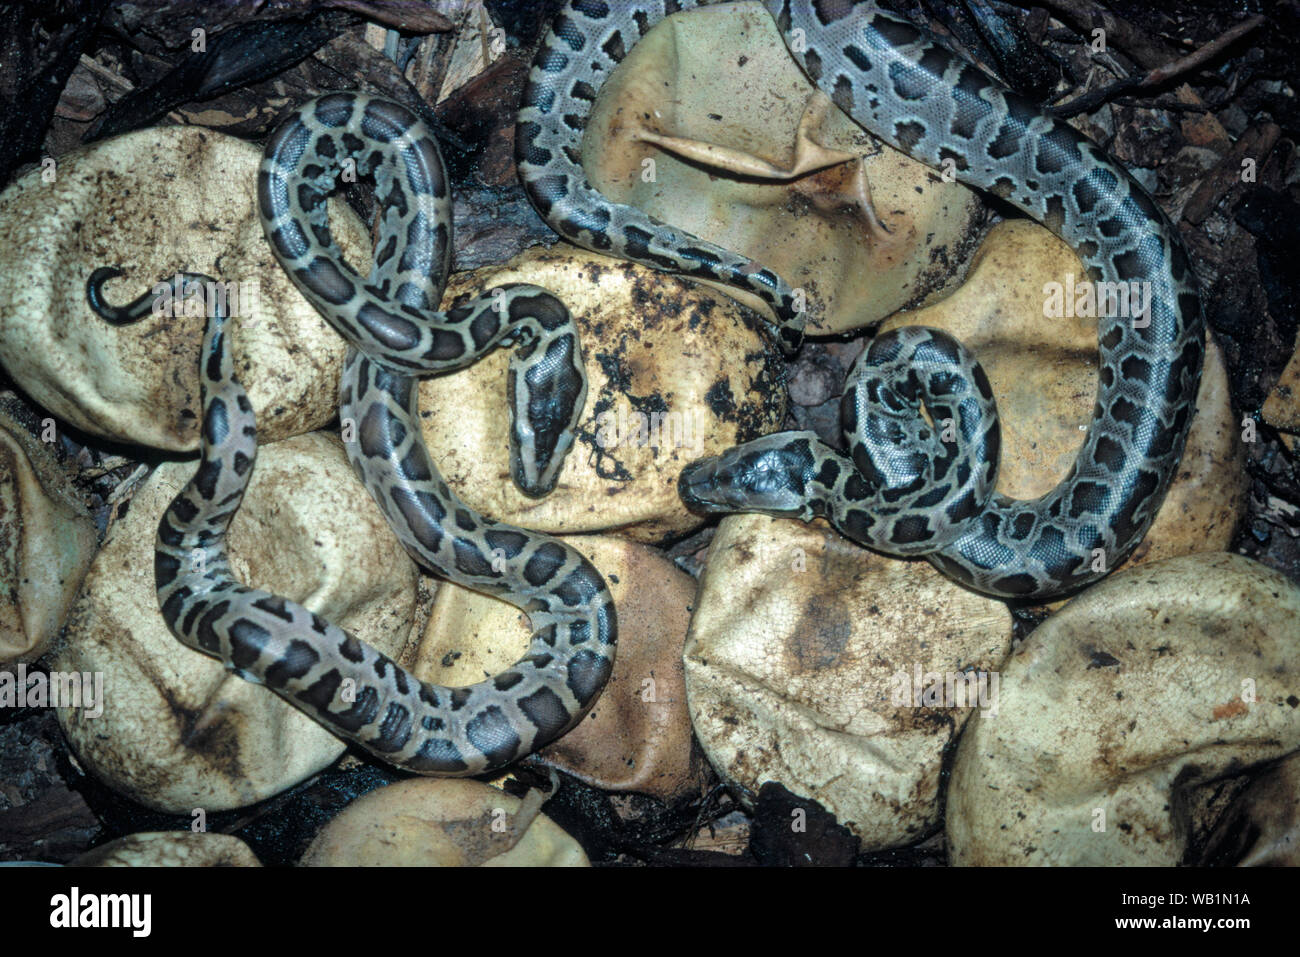 Burmese Python ( BIVITTATUS MOLURUS), eggs hatching. Clutch. two juvenile snakes on resting egg surfaces have emerged. Others to follow. Dorsal view. Stock Photo